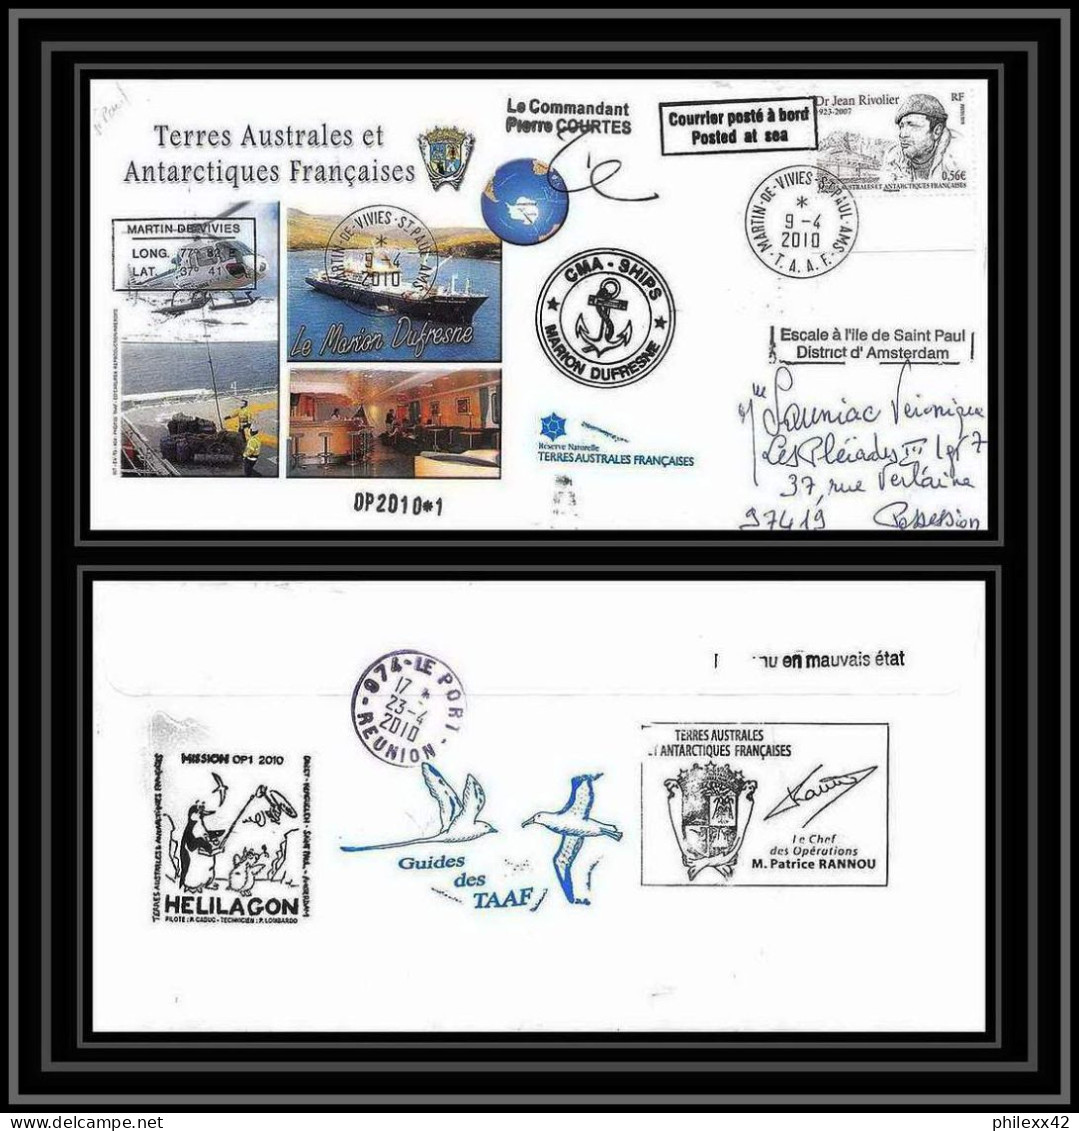 2997 Helilagon Terres Australes TAAF Lettre Cover Dufresne 2 Signé Signed St Paul Op 2010/1 9/4/2010 N°557 - Elicotteri